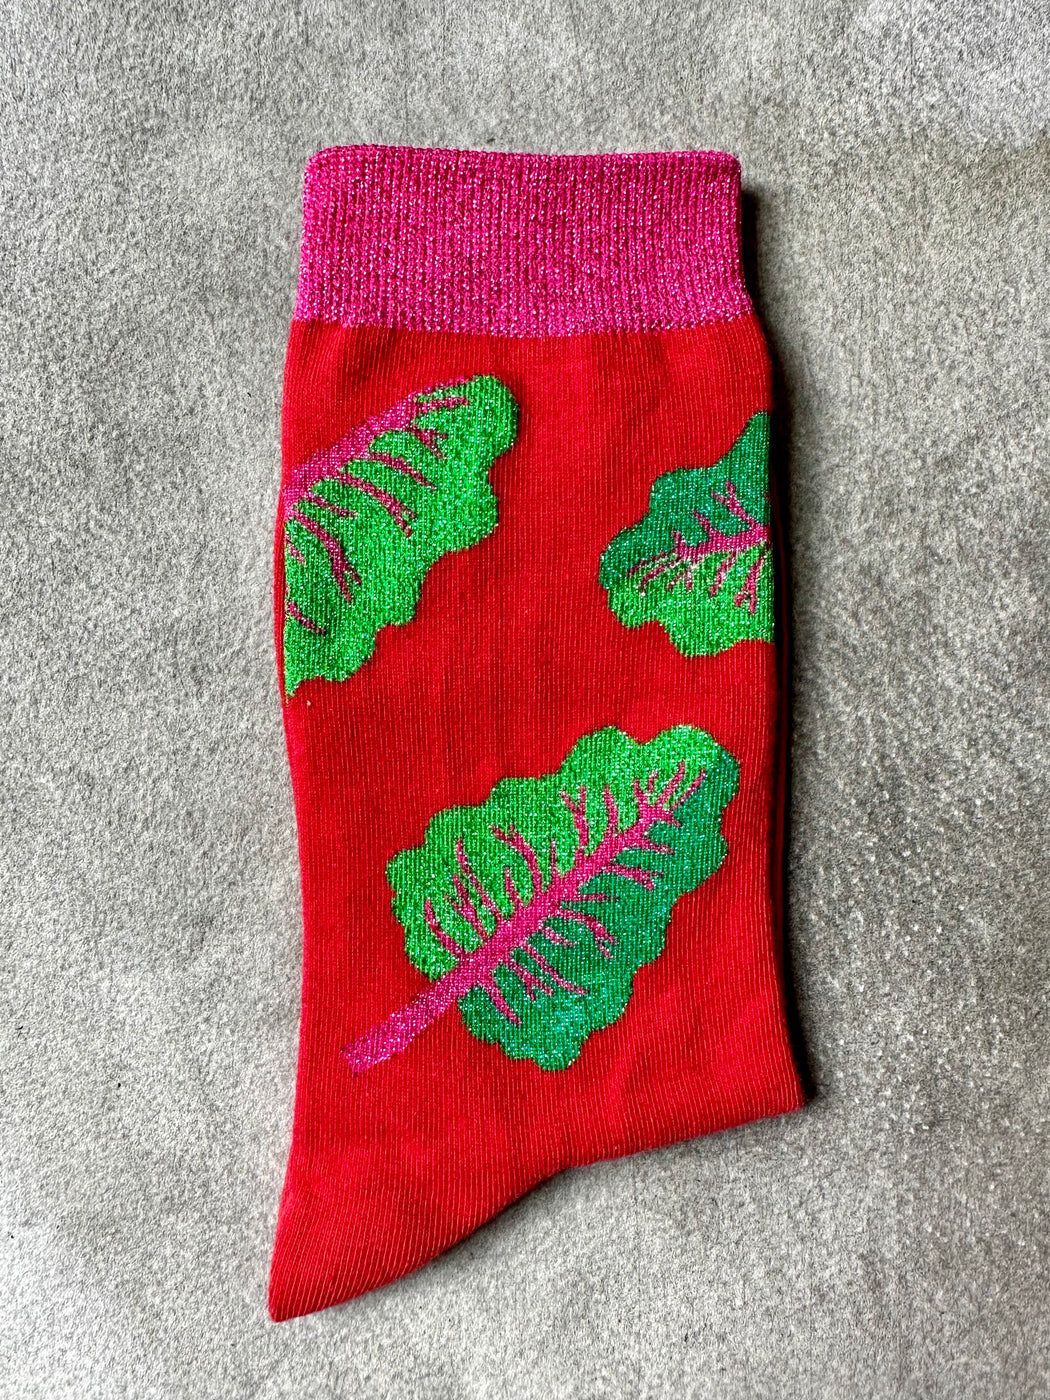 "Swiss Chard" Socks by Centinelle